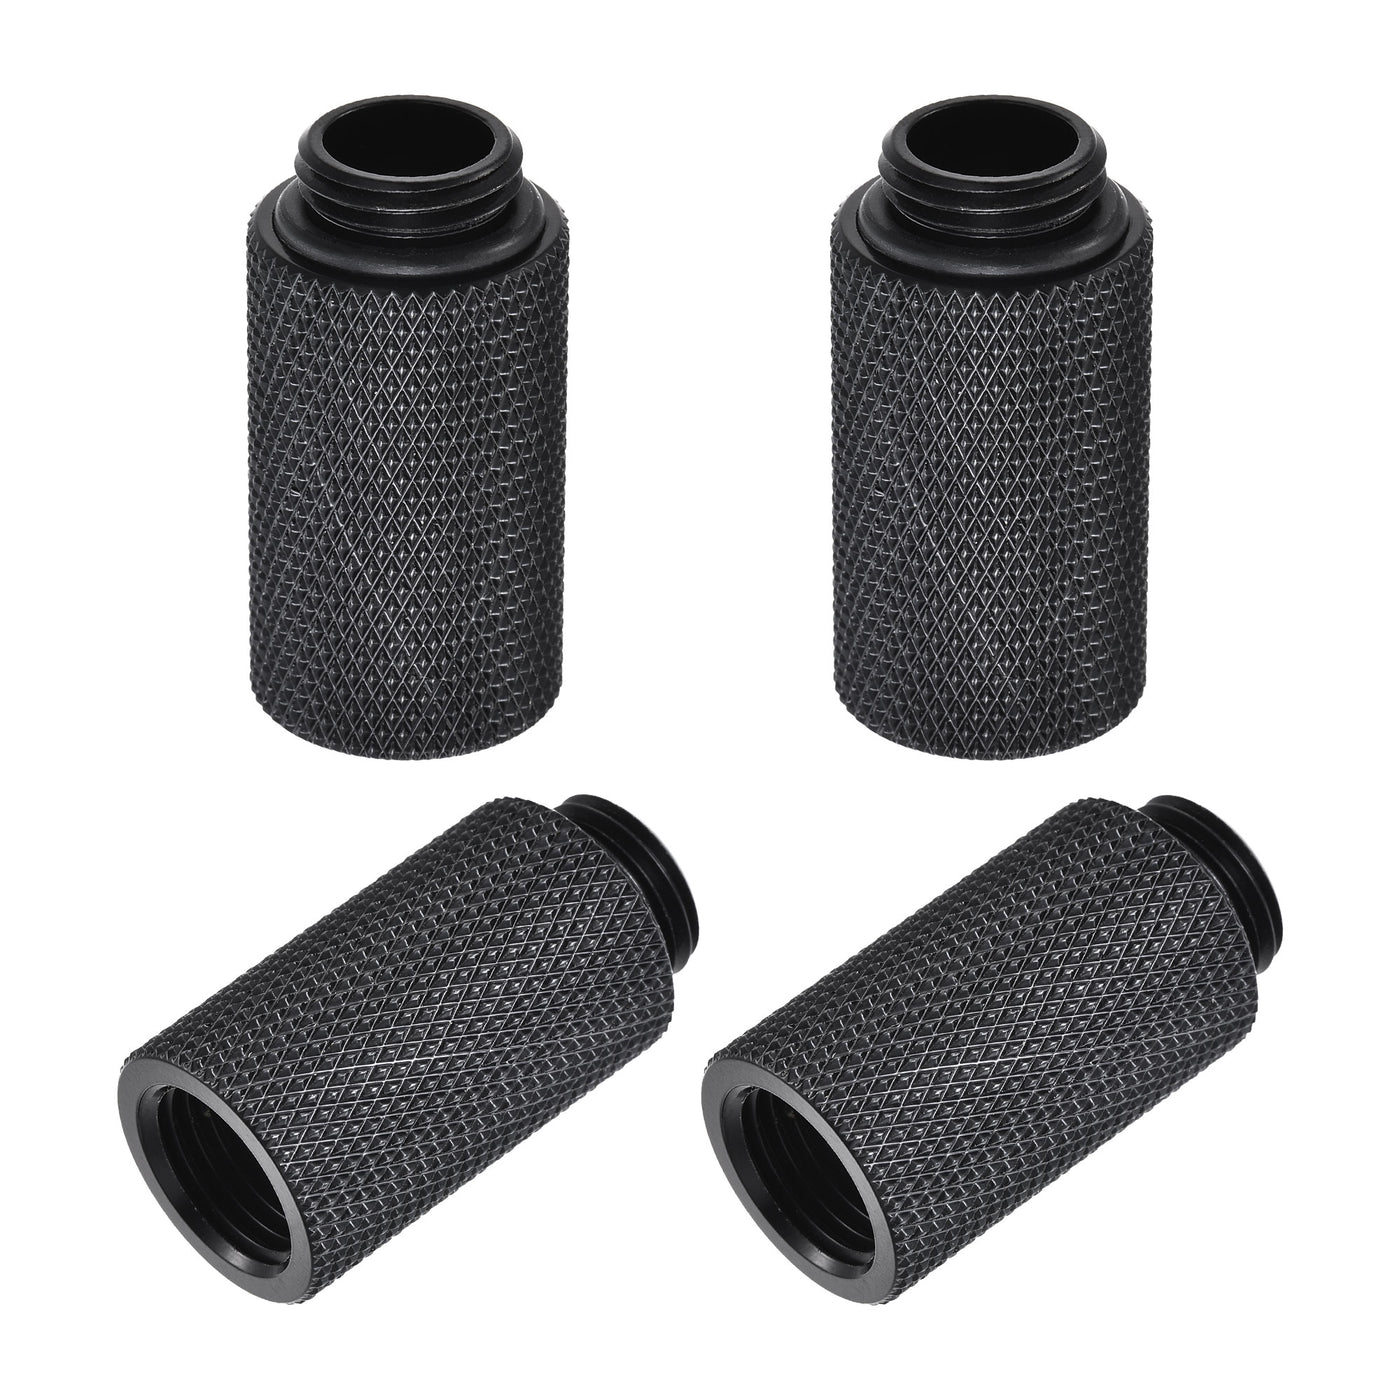 uxcell Uxcell Male to Female Extender Fitting G1/4 x 30mm for Water Cooling System Black 4pcs